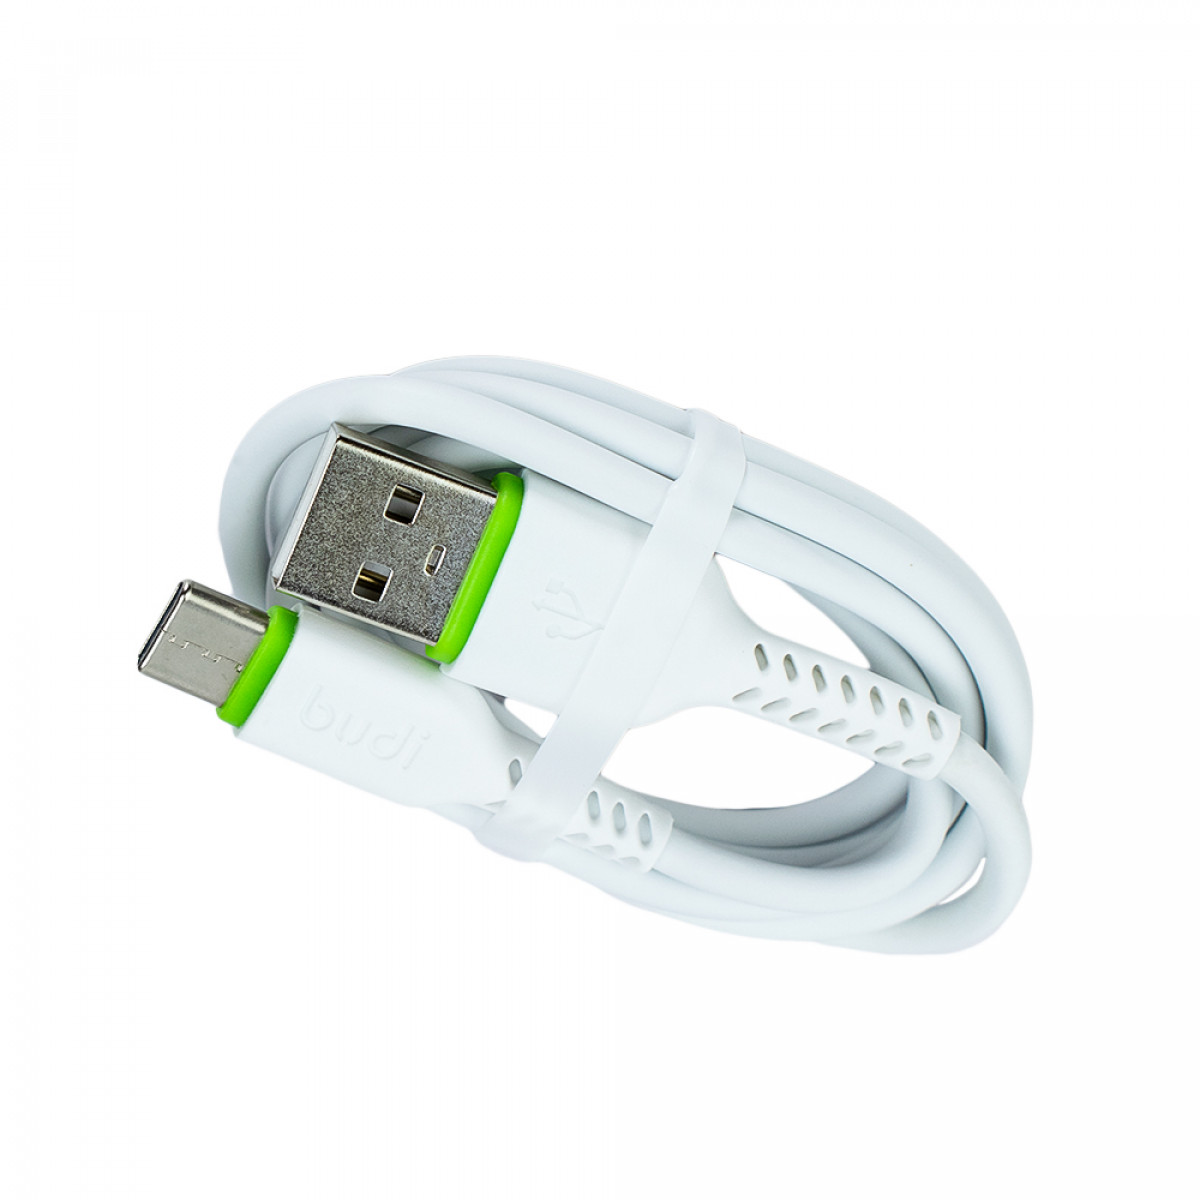 M8J158T (NP) - Type C to USB Charge/Sync1m no packing